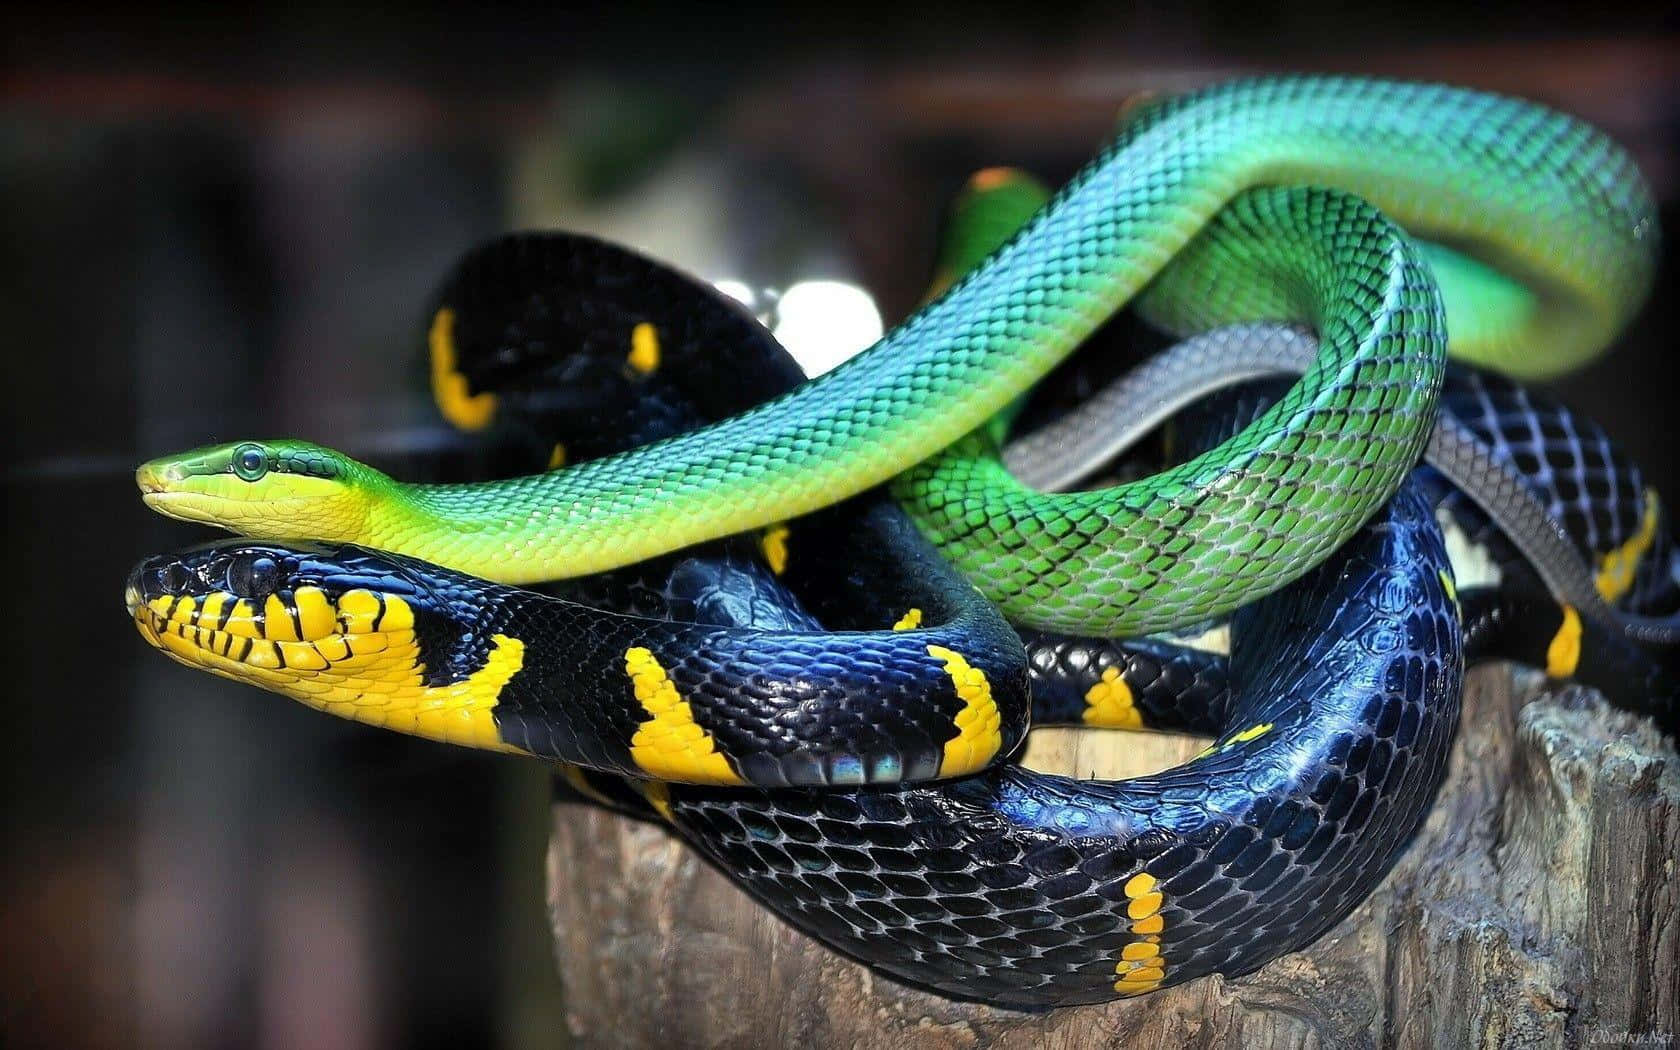 "The elegant markings of a Cobra snake stand out in this intense portrait."